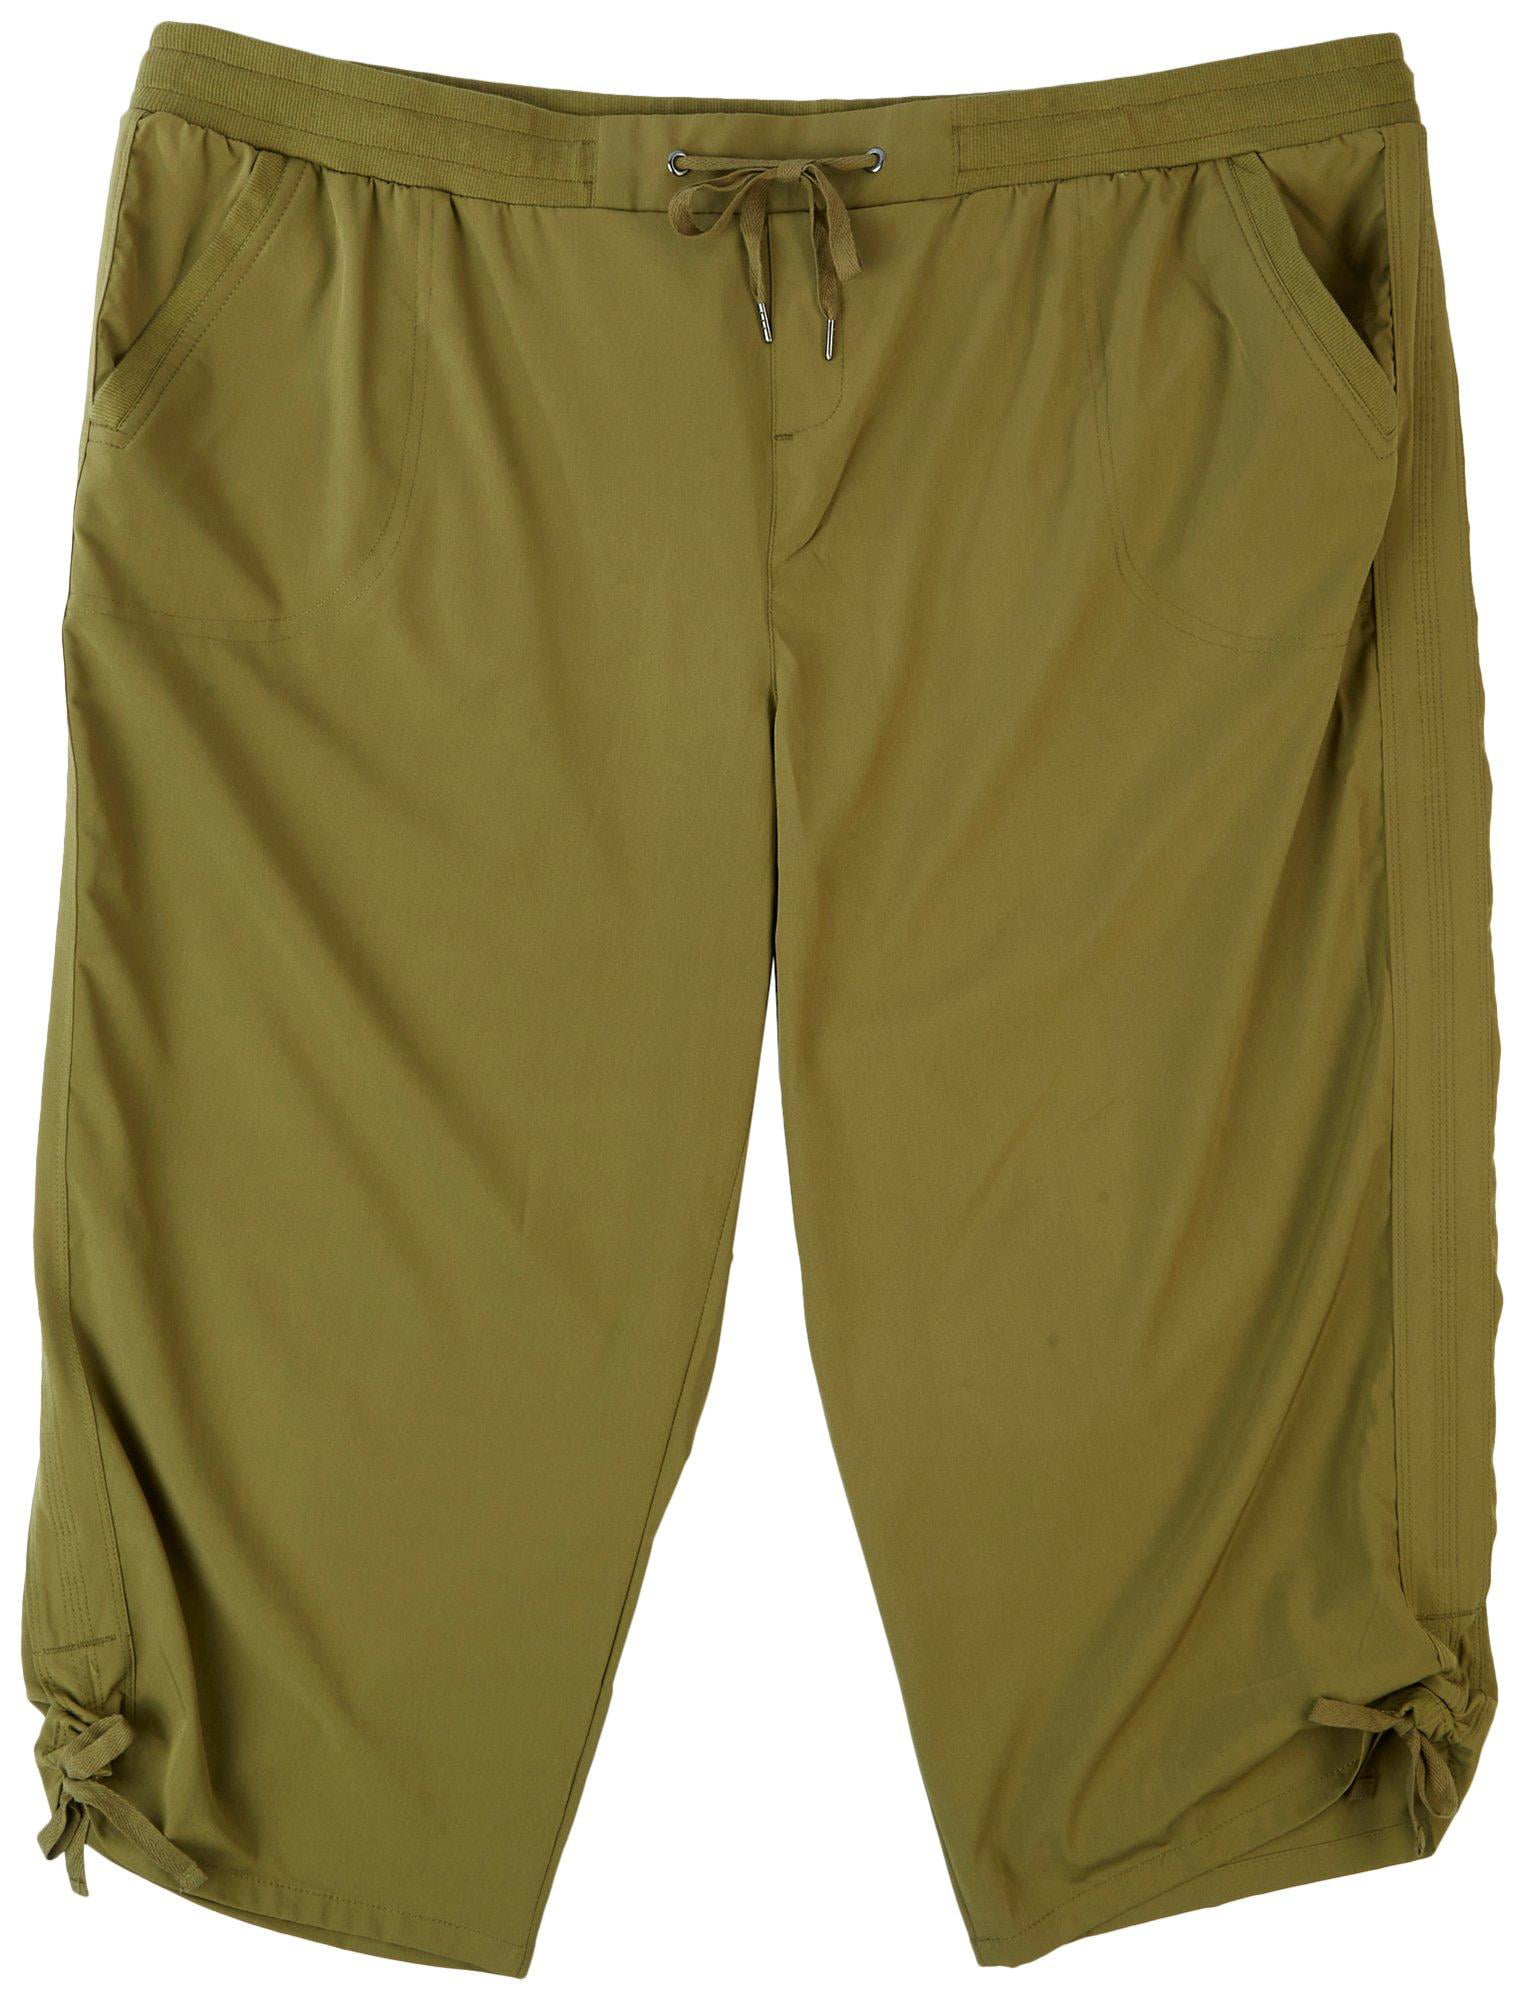 ATTYRE Plus Solid Side Ruched Pull-On Capri Pants 20W Olive - Walmart.com